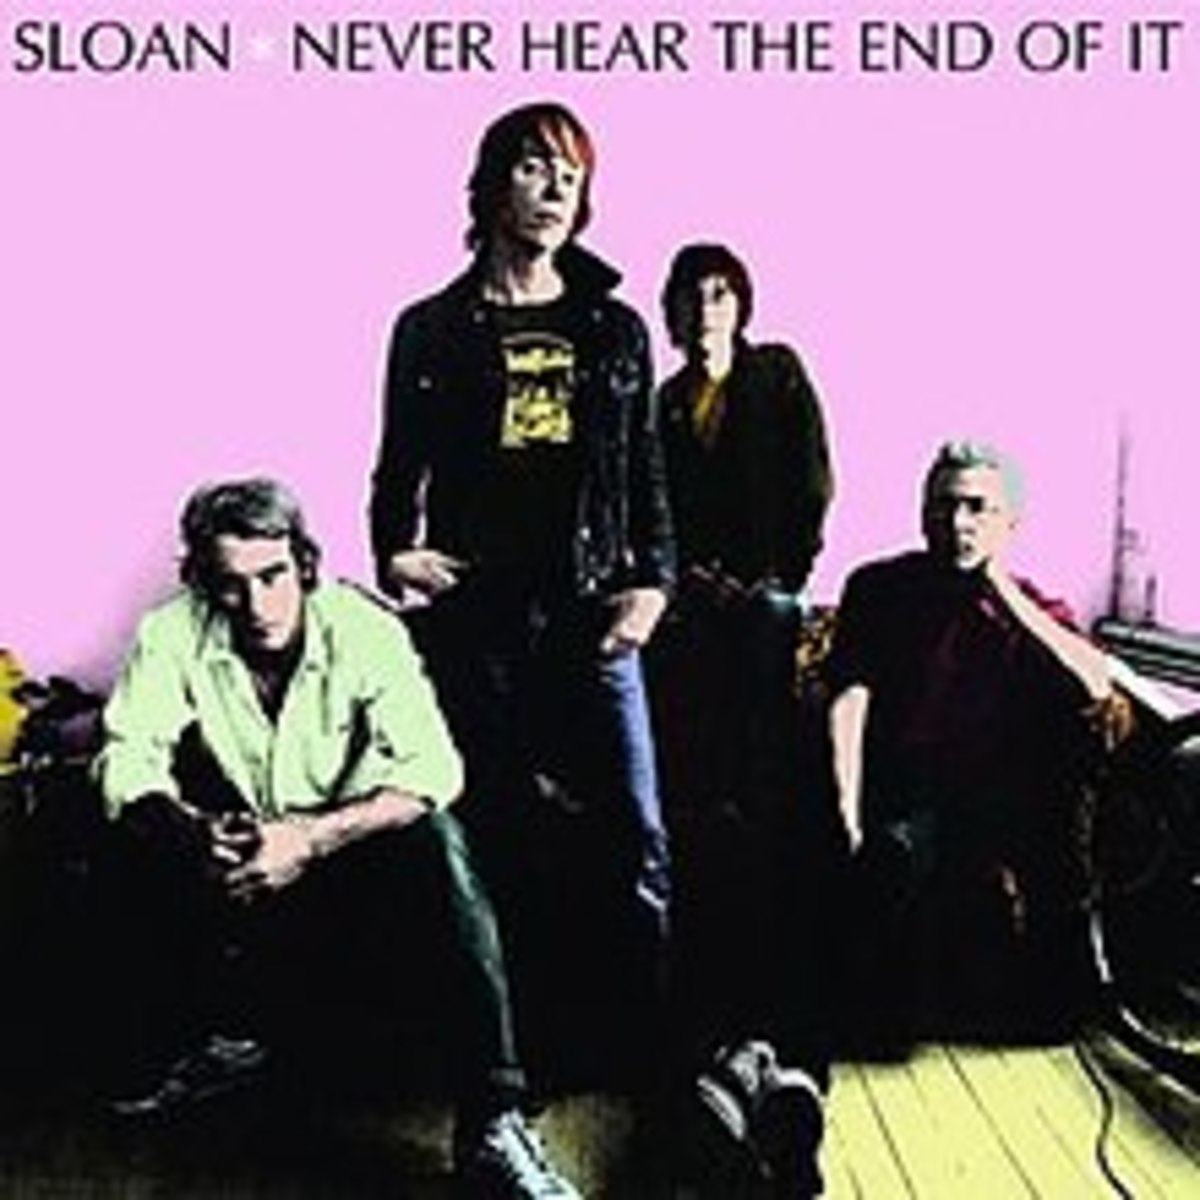 Sloan_never_hear_the_end_of_it